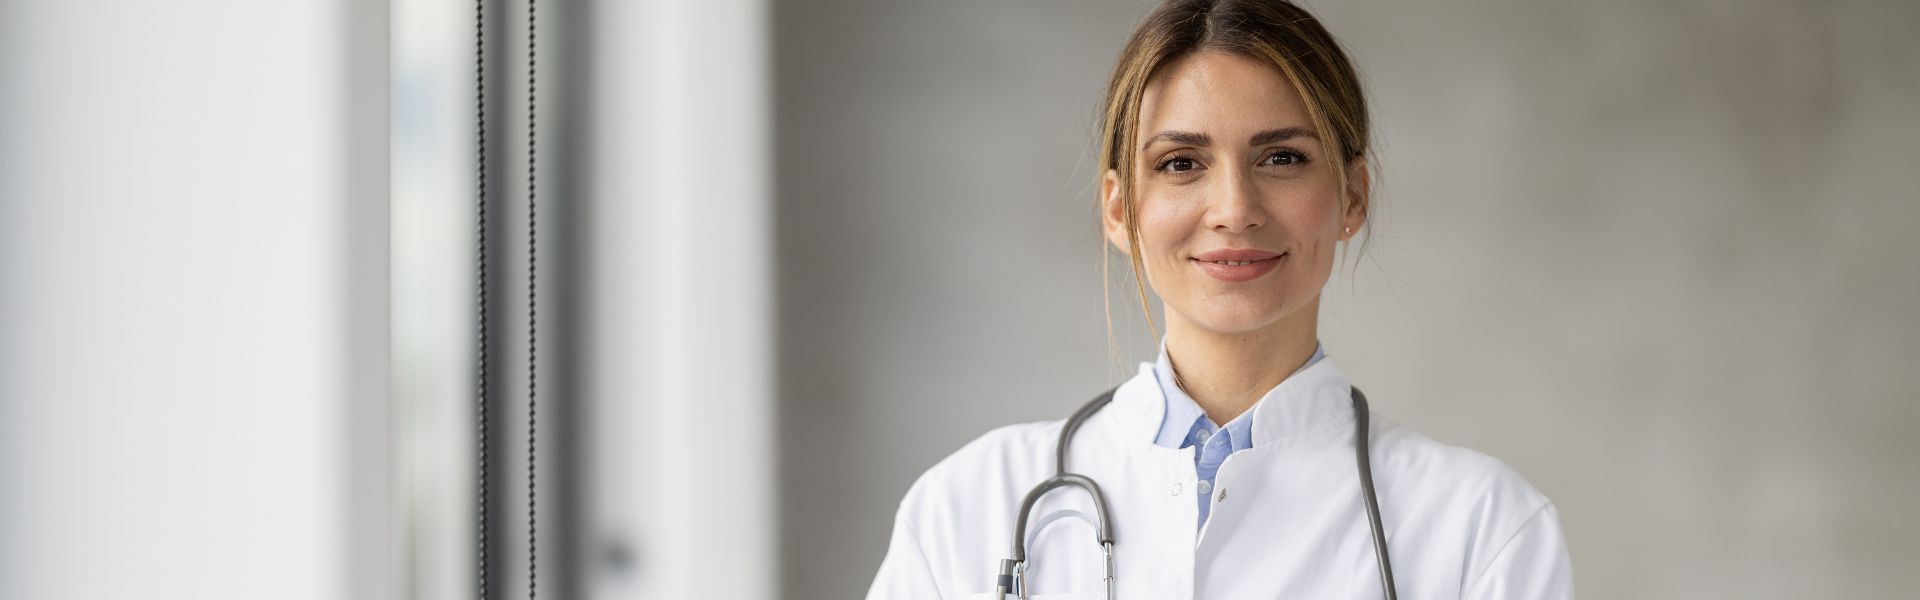 How to Succeed as a Locum Tenens Professional in New Jersey